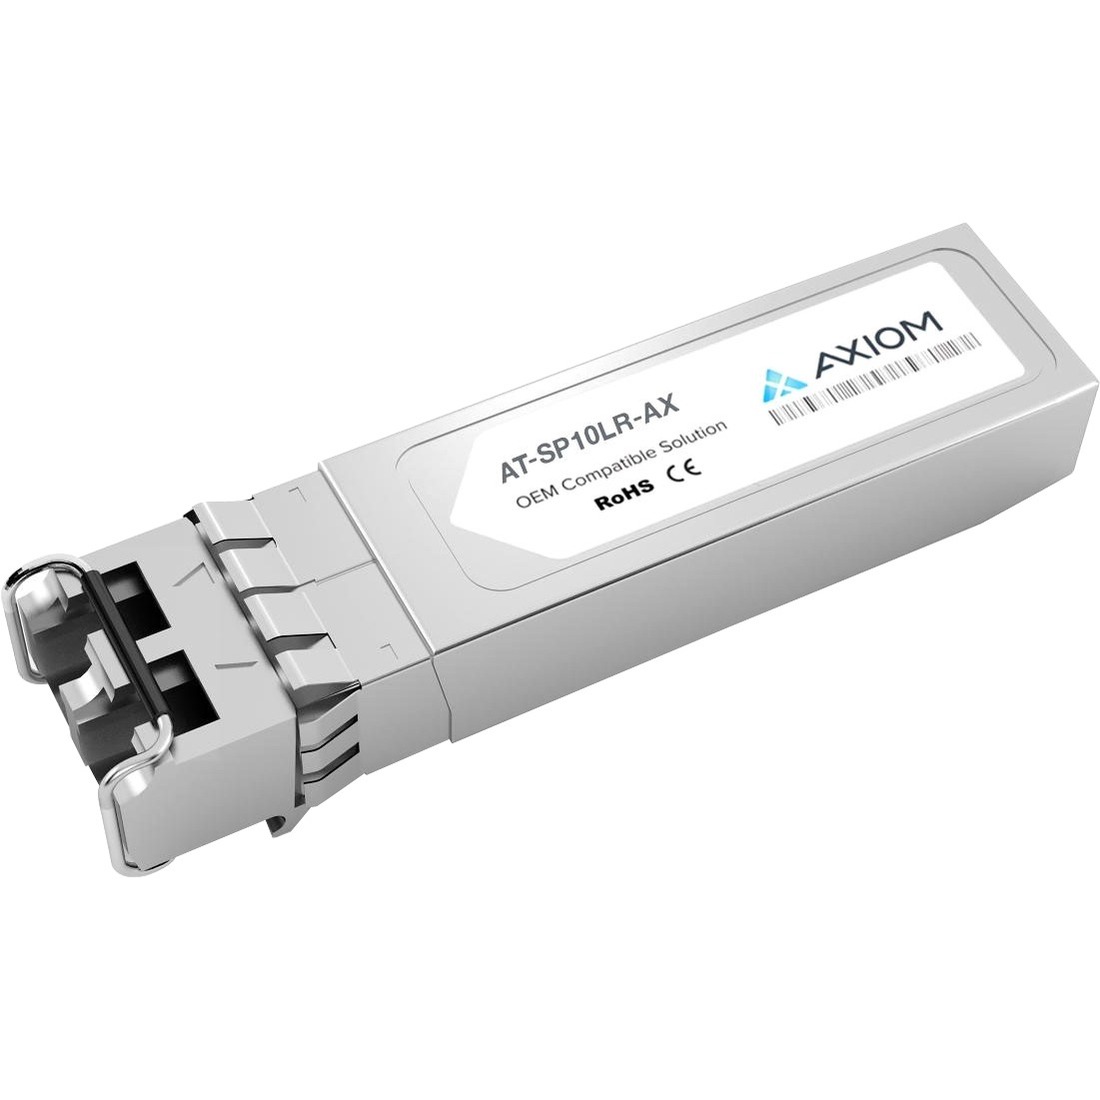 Axiom 10GBASE-LR SFP+ Transceiver for Allied Telesis AT-SP10LR 